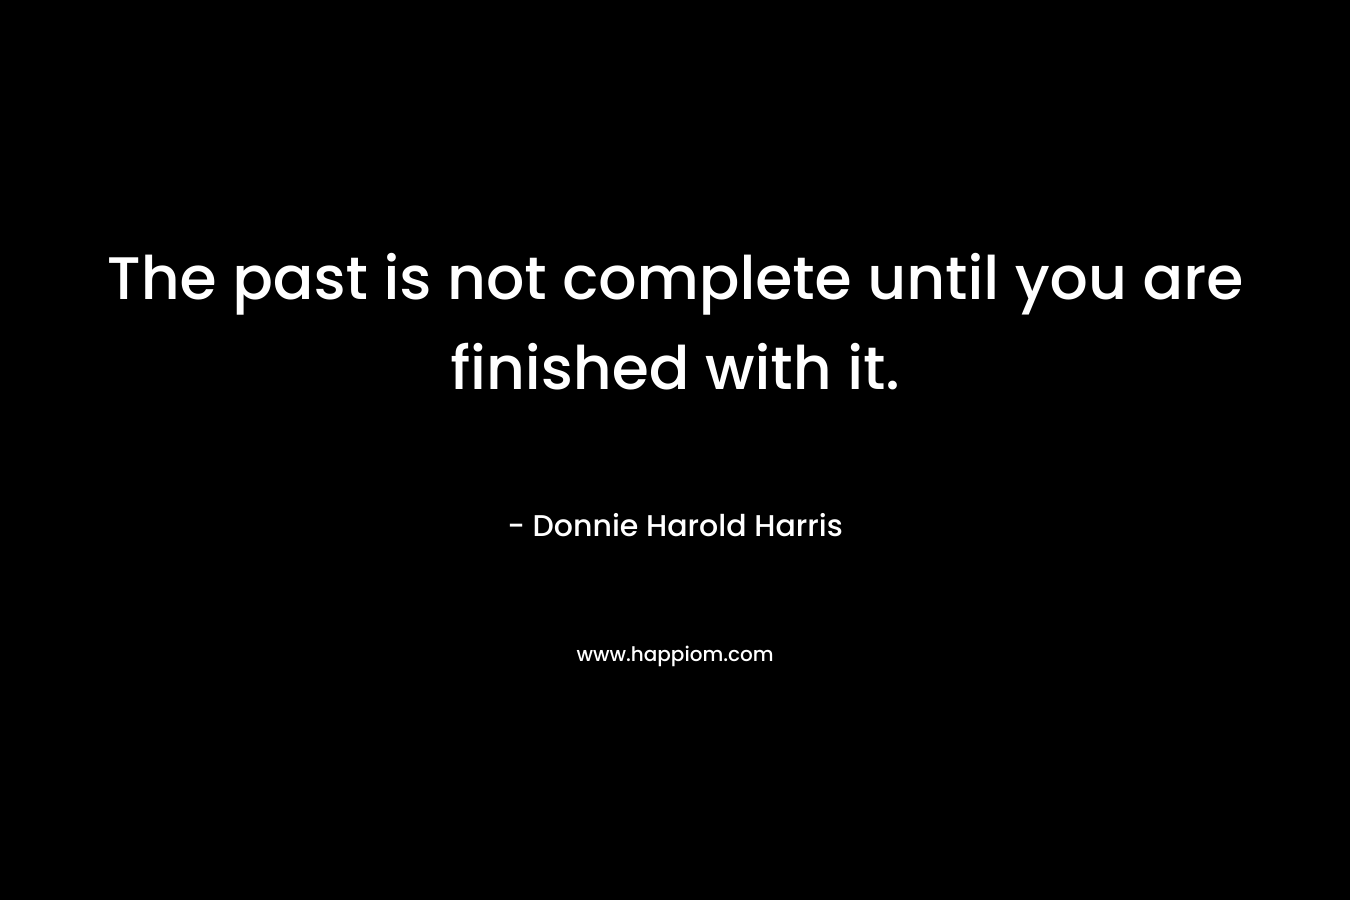 The past is not complete until you are finished with it. – Donnie Harold Harris